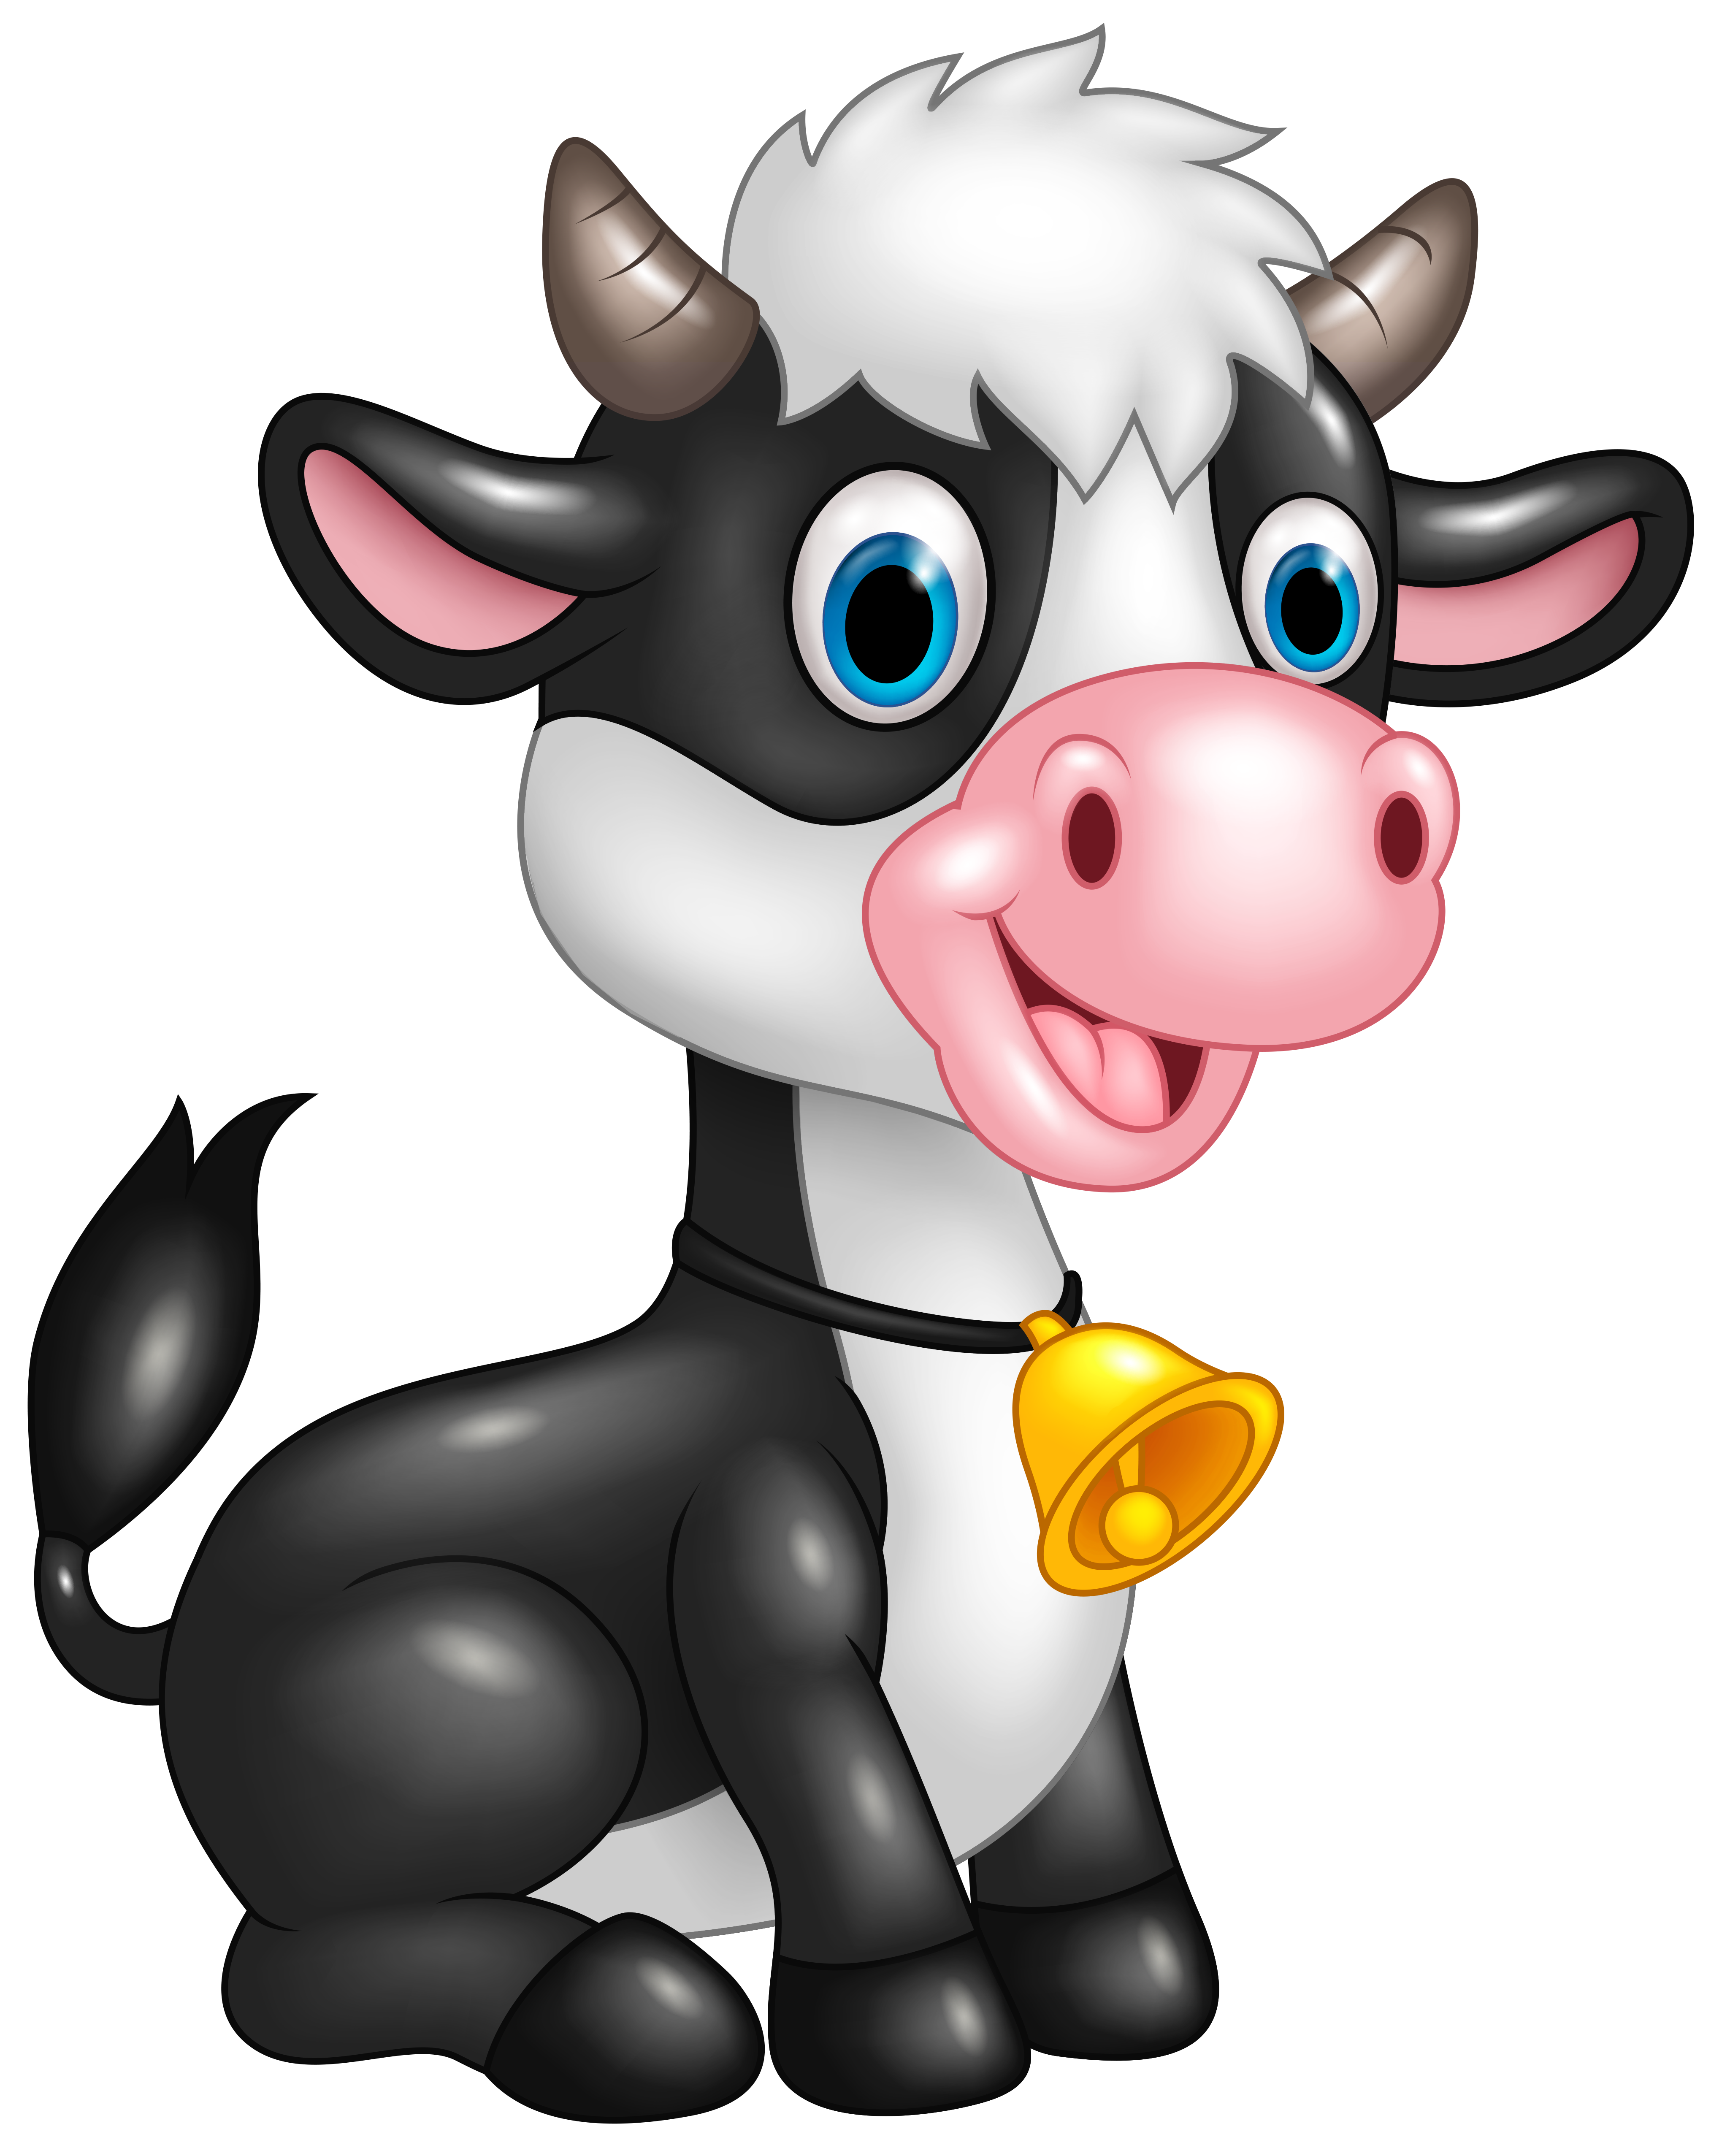 Cute Cow Cartoon PNG Clipart Image | Gallery Yopriceville - High